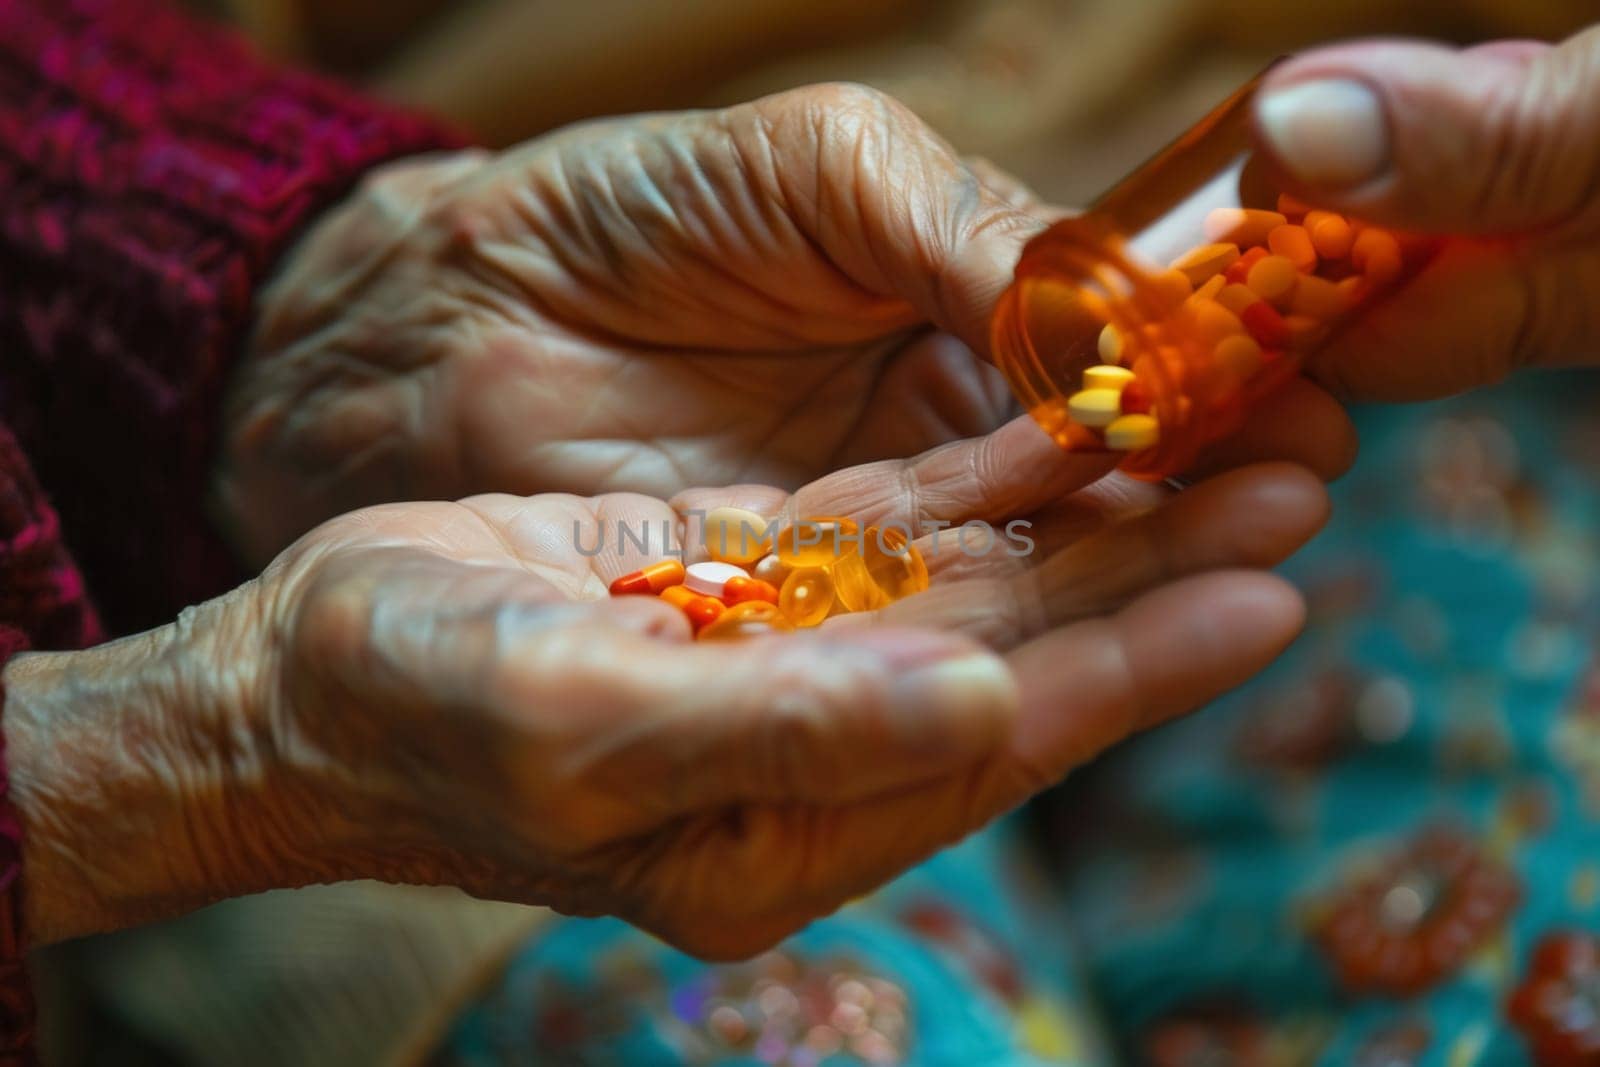 A caregiver's hand gently transferring assorted pills to an elderly person's open palm, symbolizing care and support